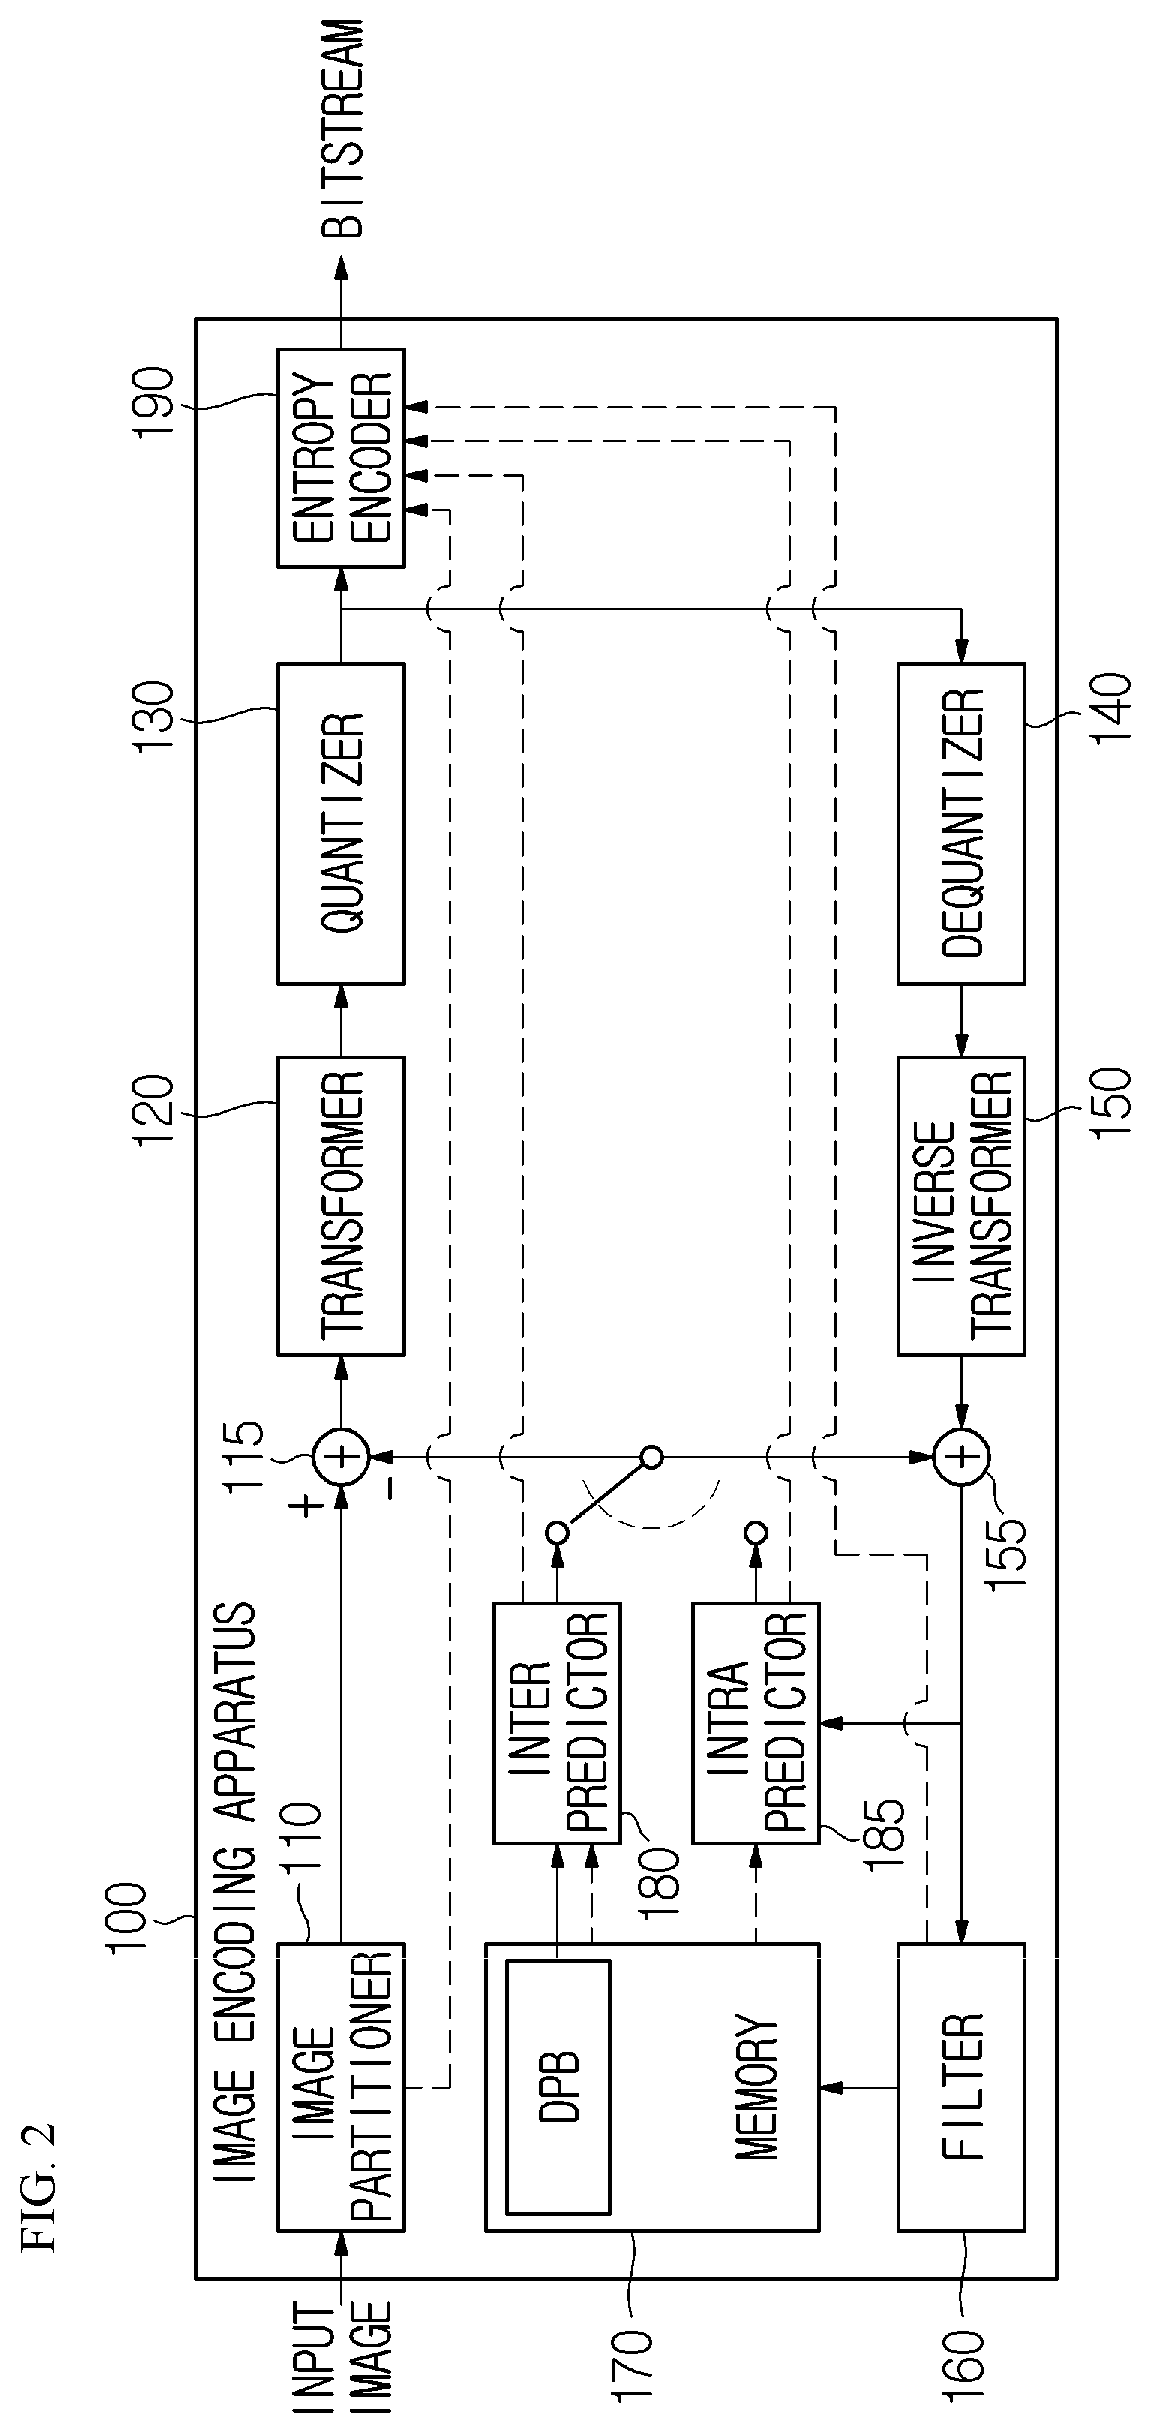 Image encoding/decoding method and device for performing mip and lfnst, and method for transmitting bitstream